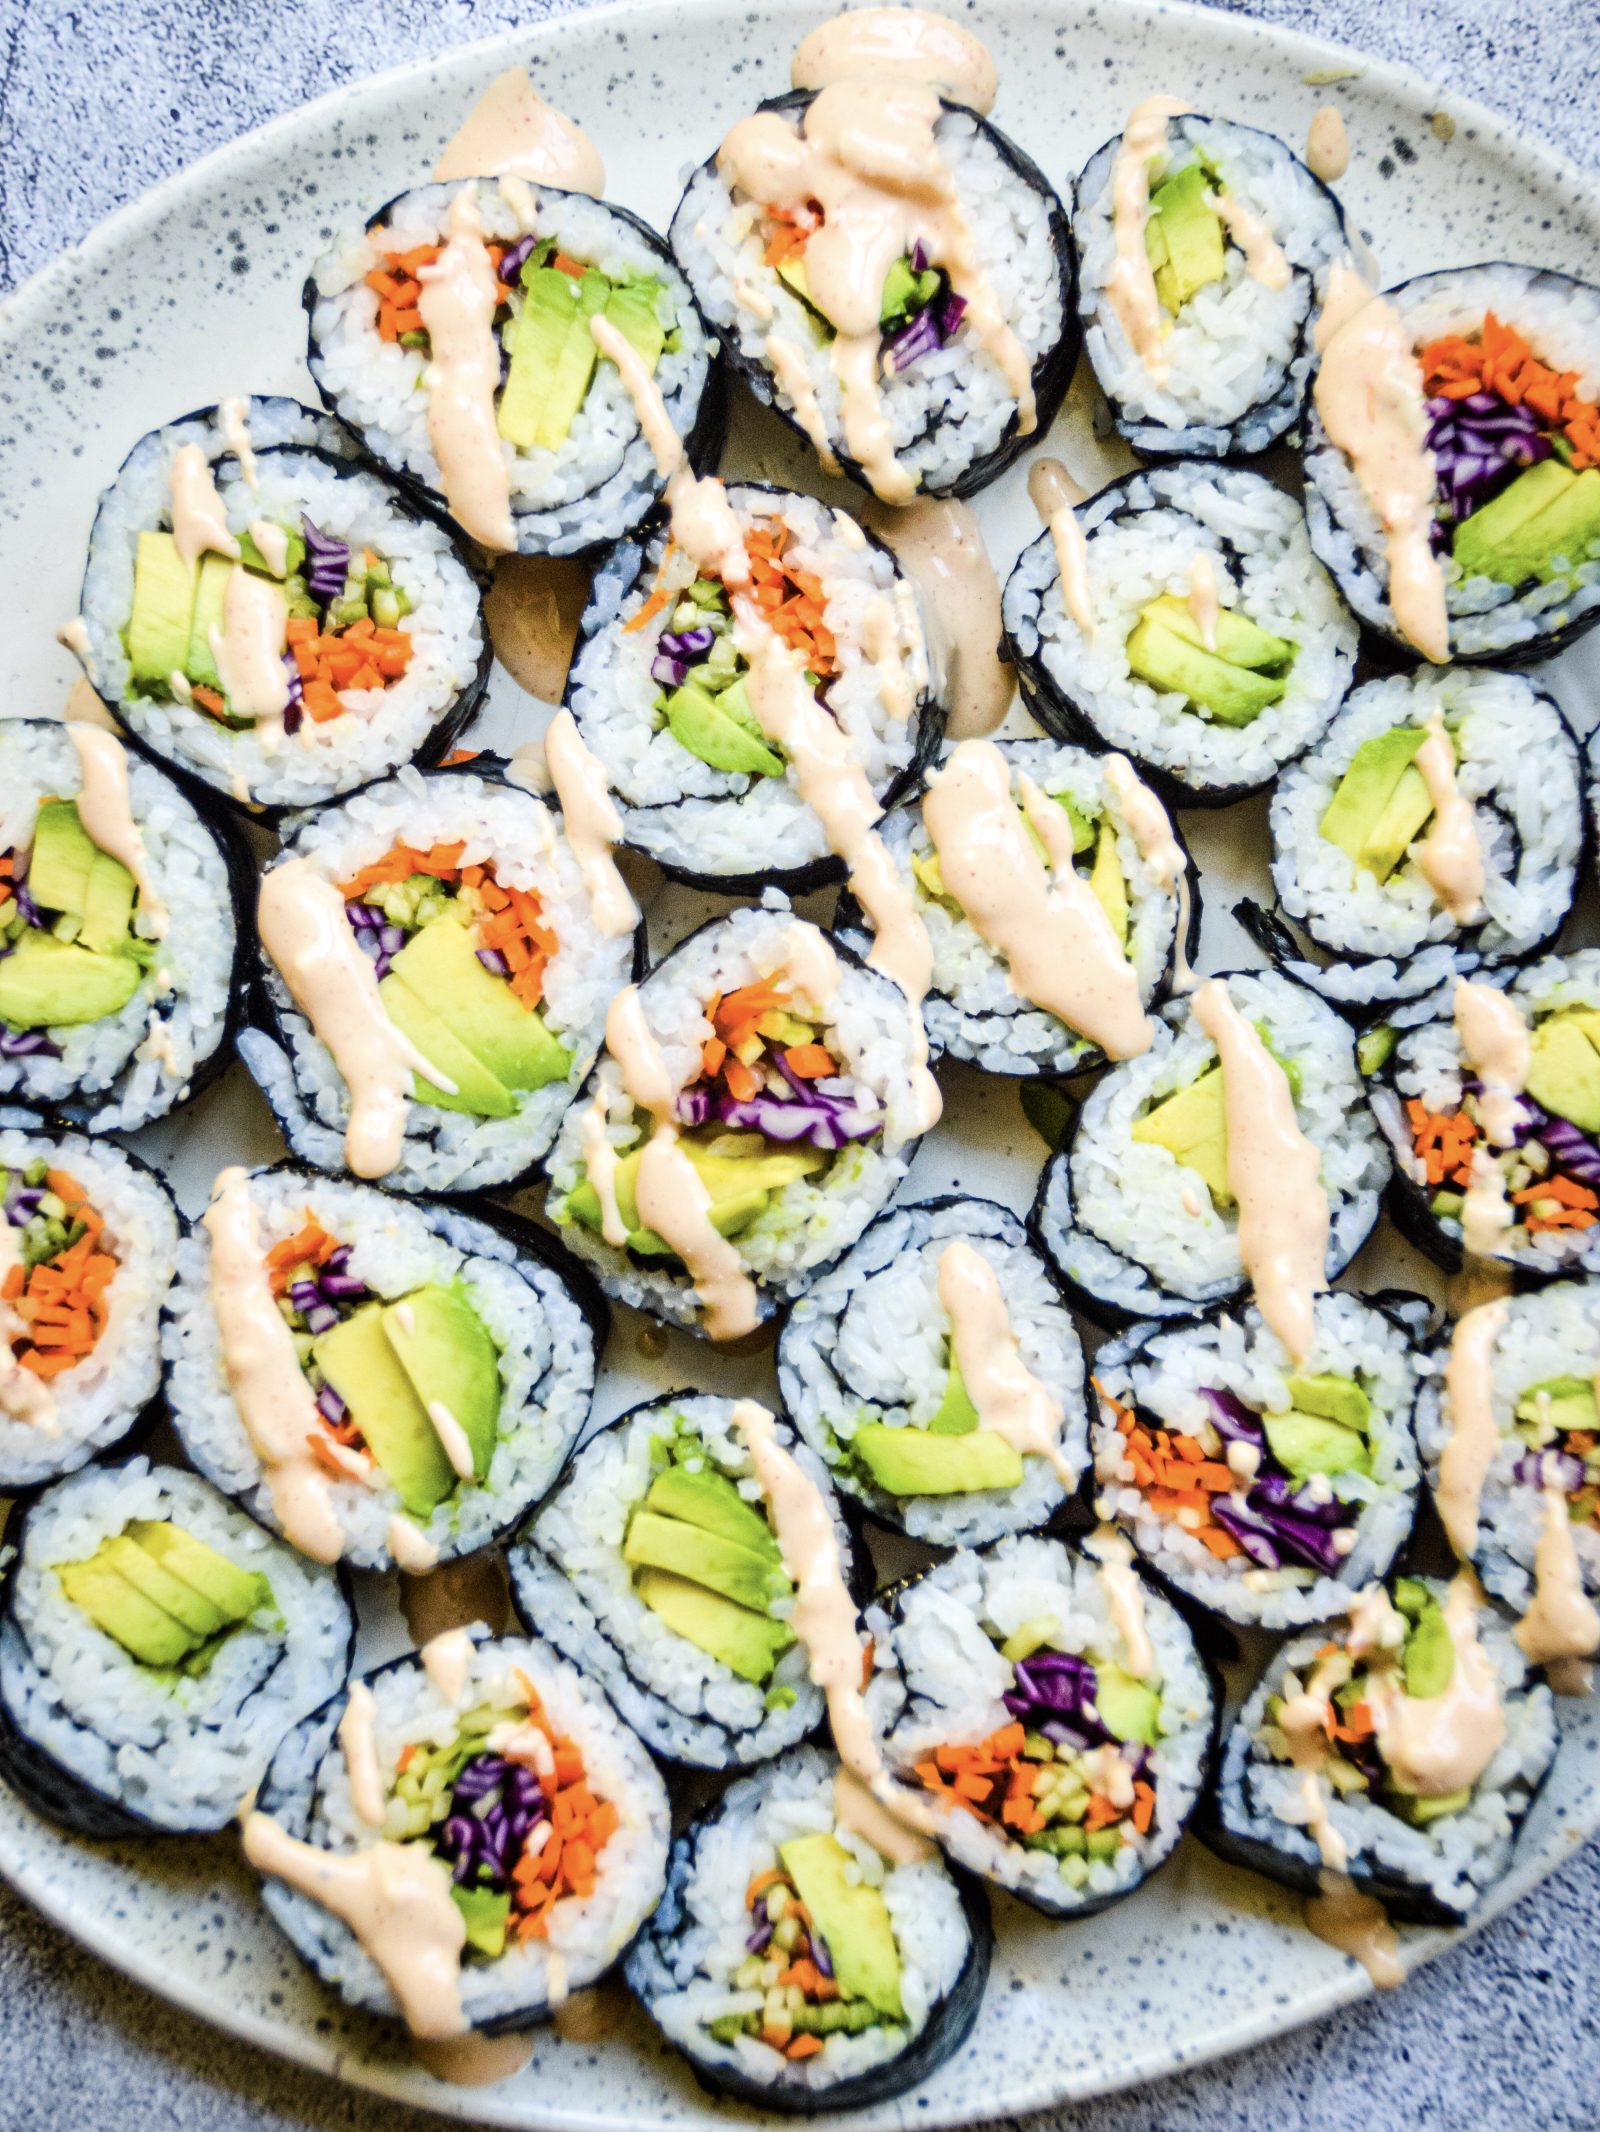 Make perfect sushi rolls every time with the Sushi Bazooka 